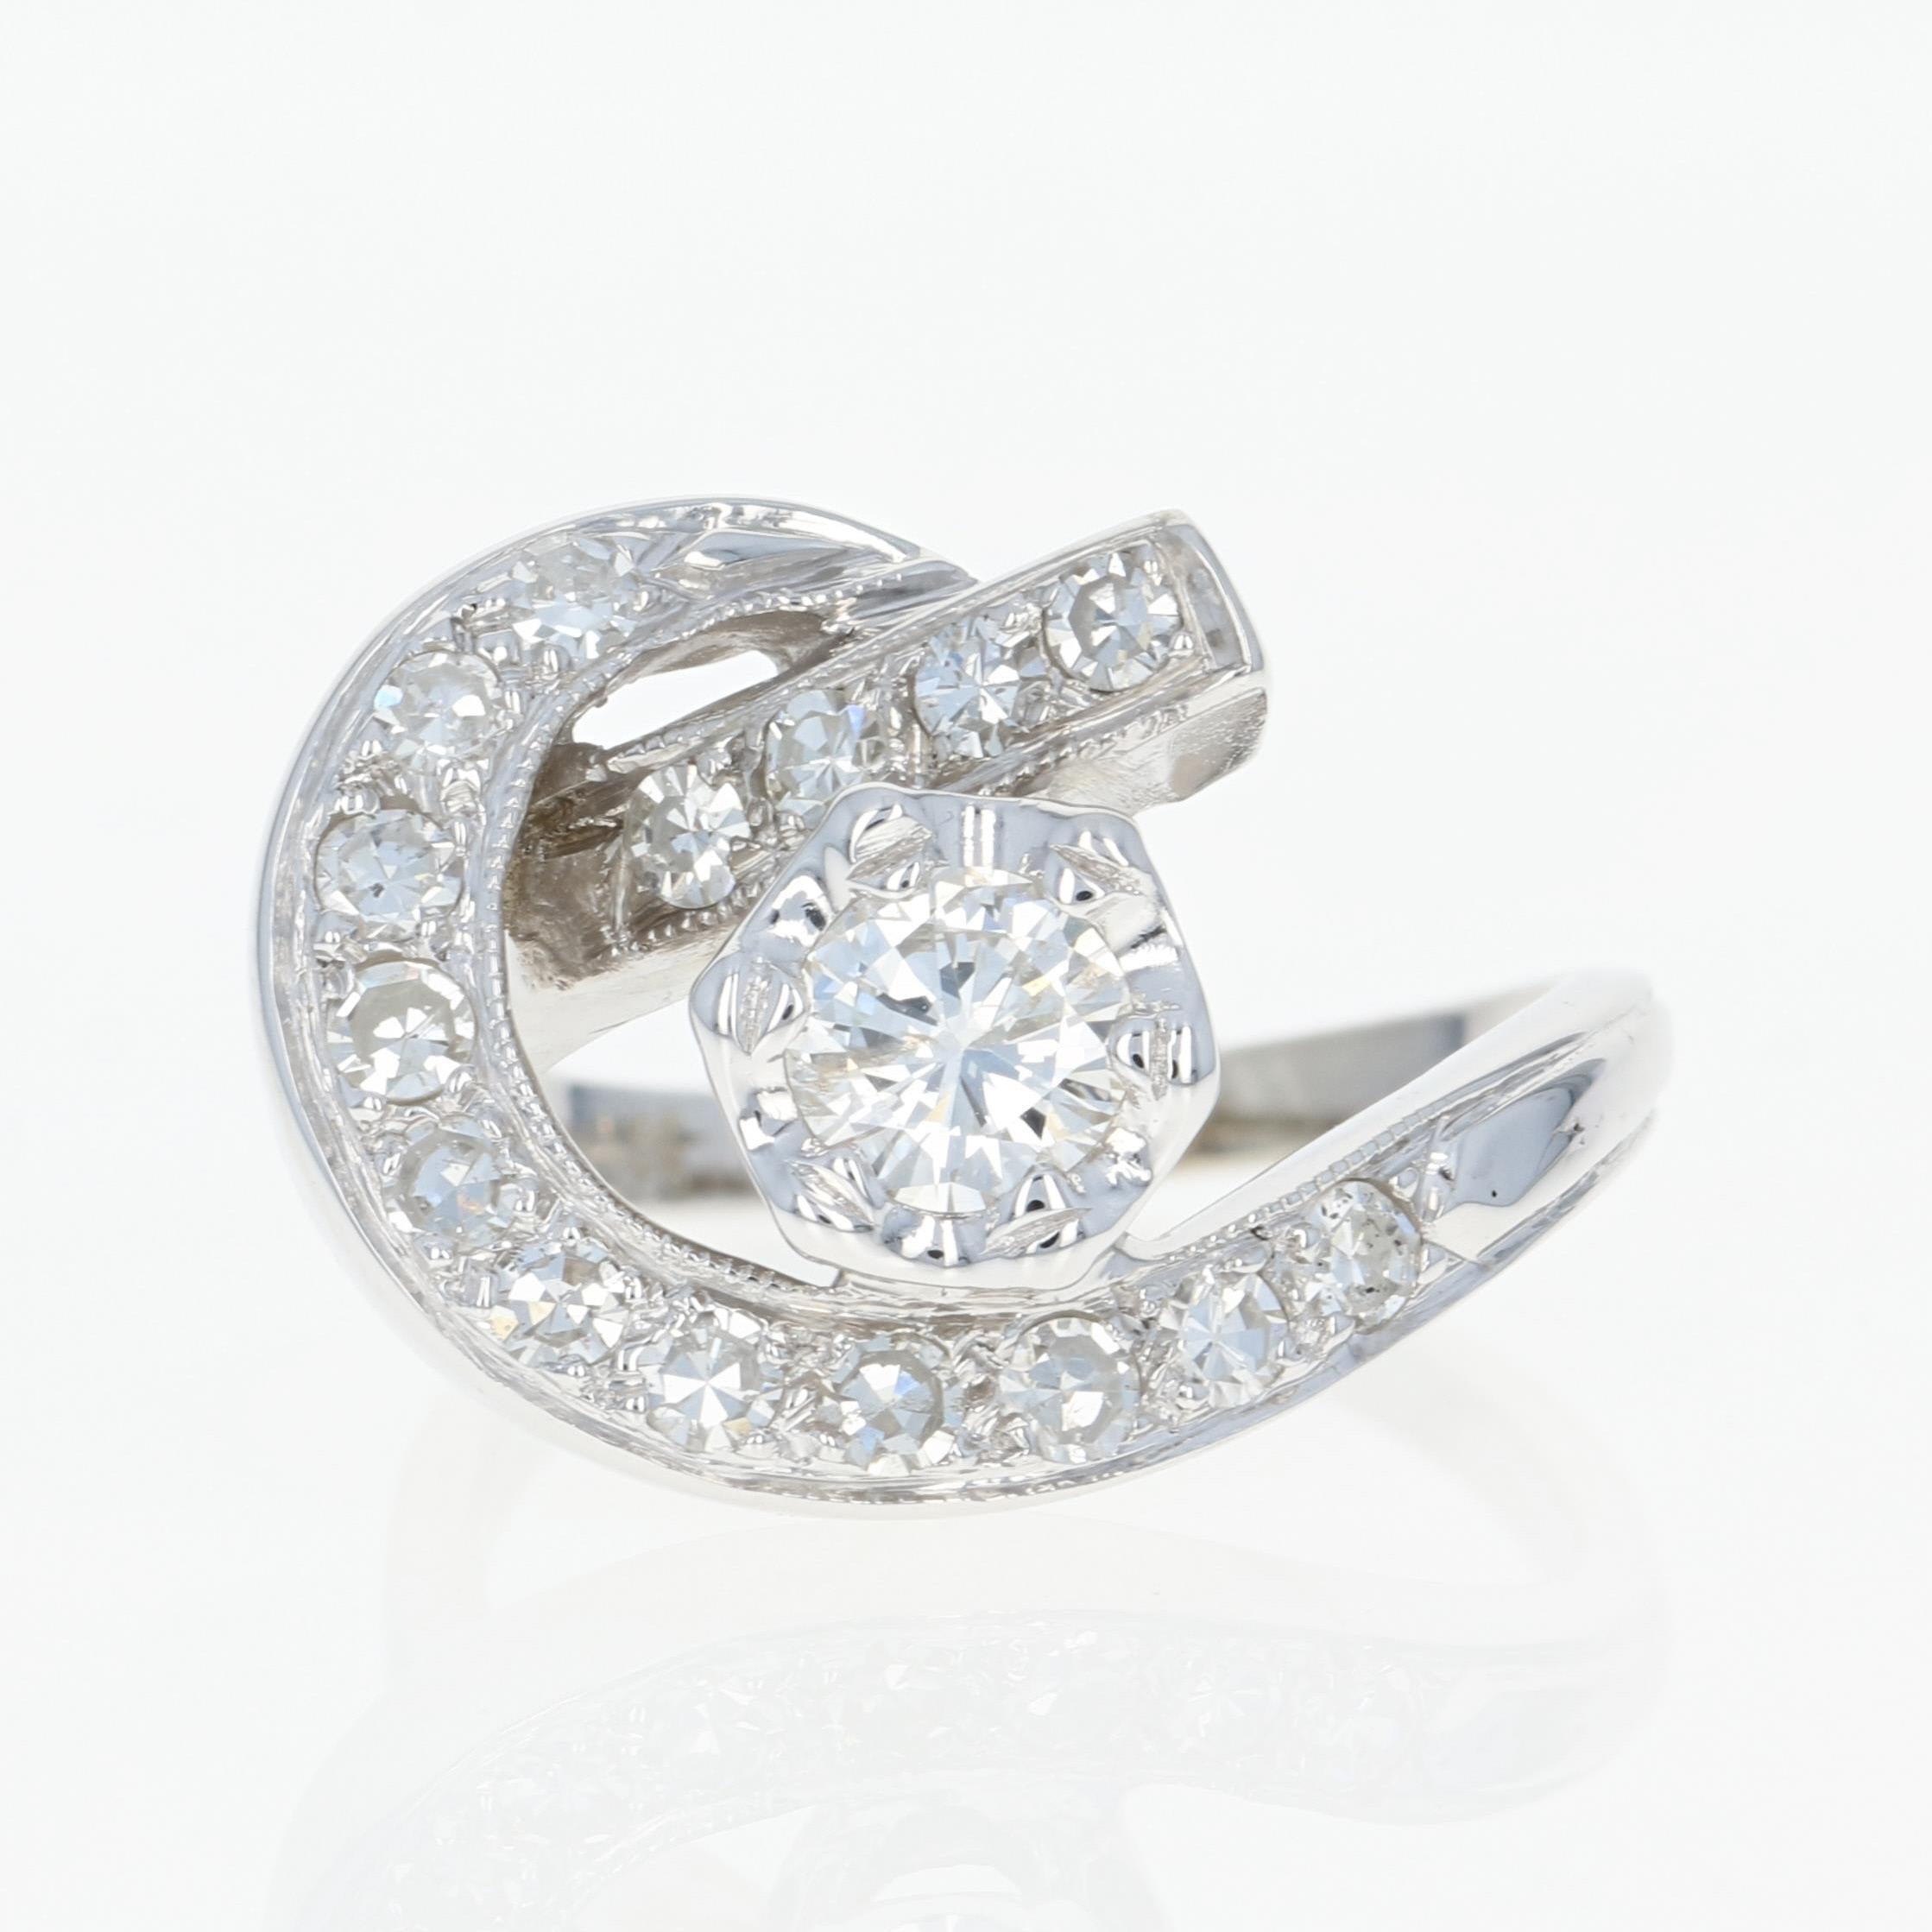 Define your style with this sunning ring! Fashioned in popular 14k white gold, this retro piece from circa 1940’s - 1950’s features a modified bypass-style band adorned in the center with a diamond solitaire. Diamond accents embellish the swirls